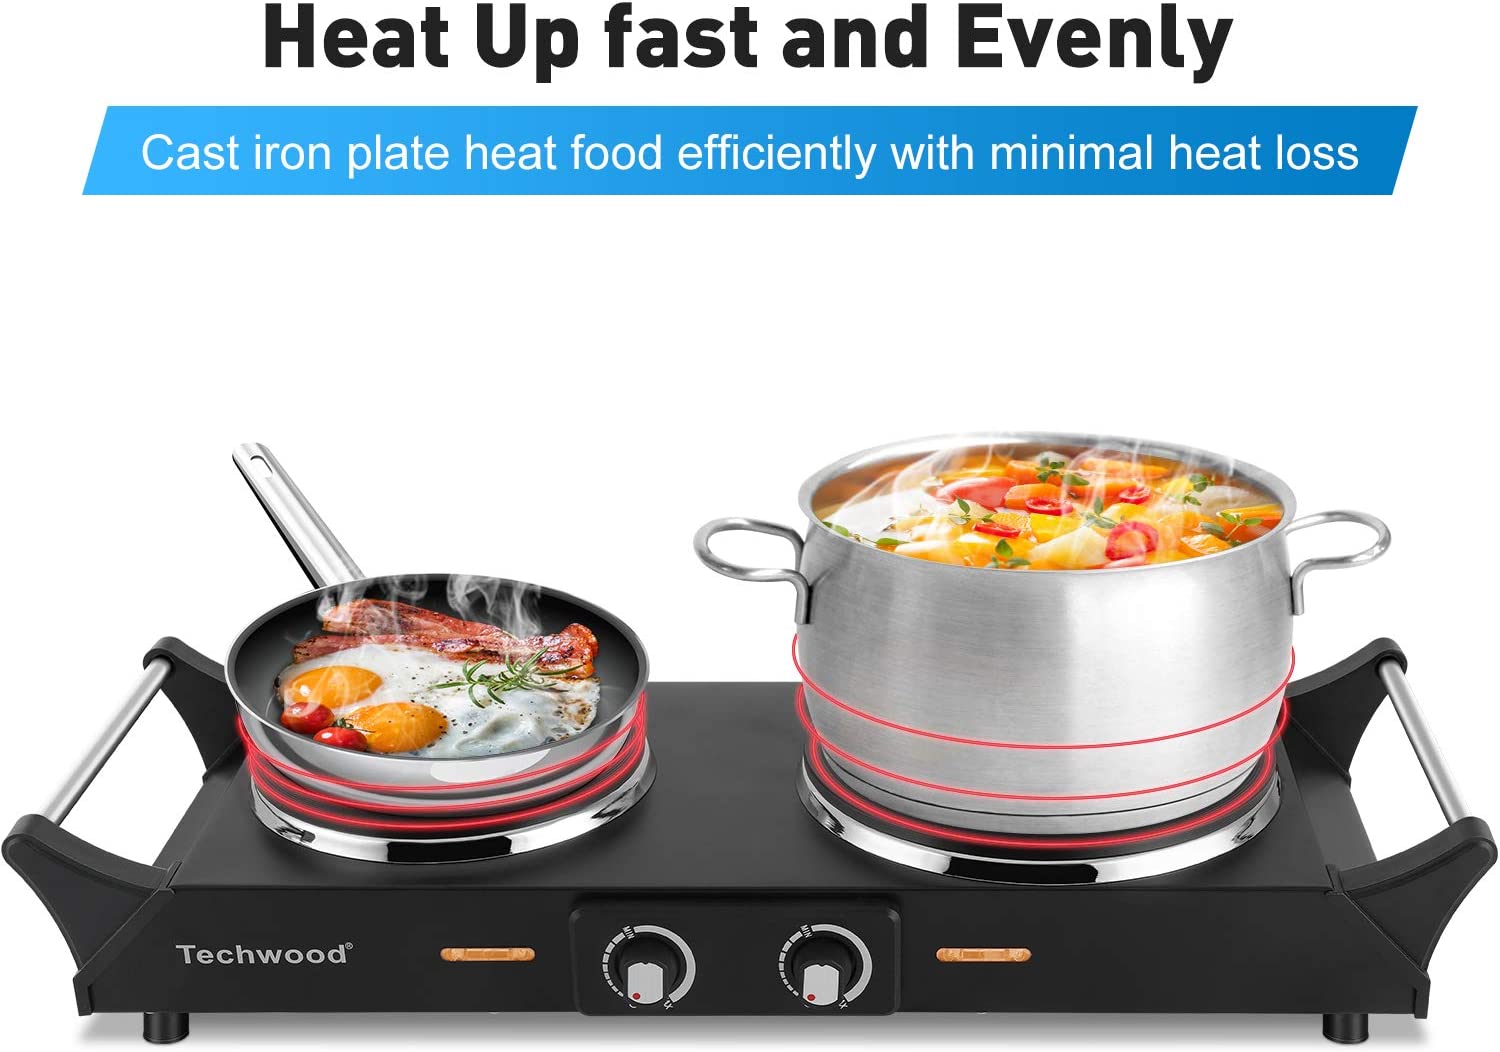 Techwood 1800W Stainless Steel Dual Hot Plate with Stay Cool Handles(B